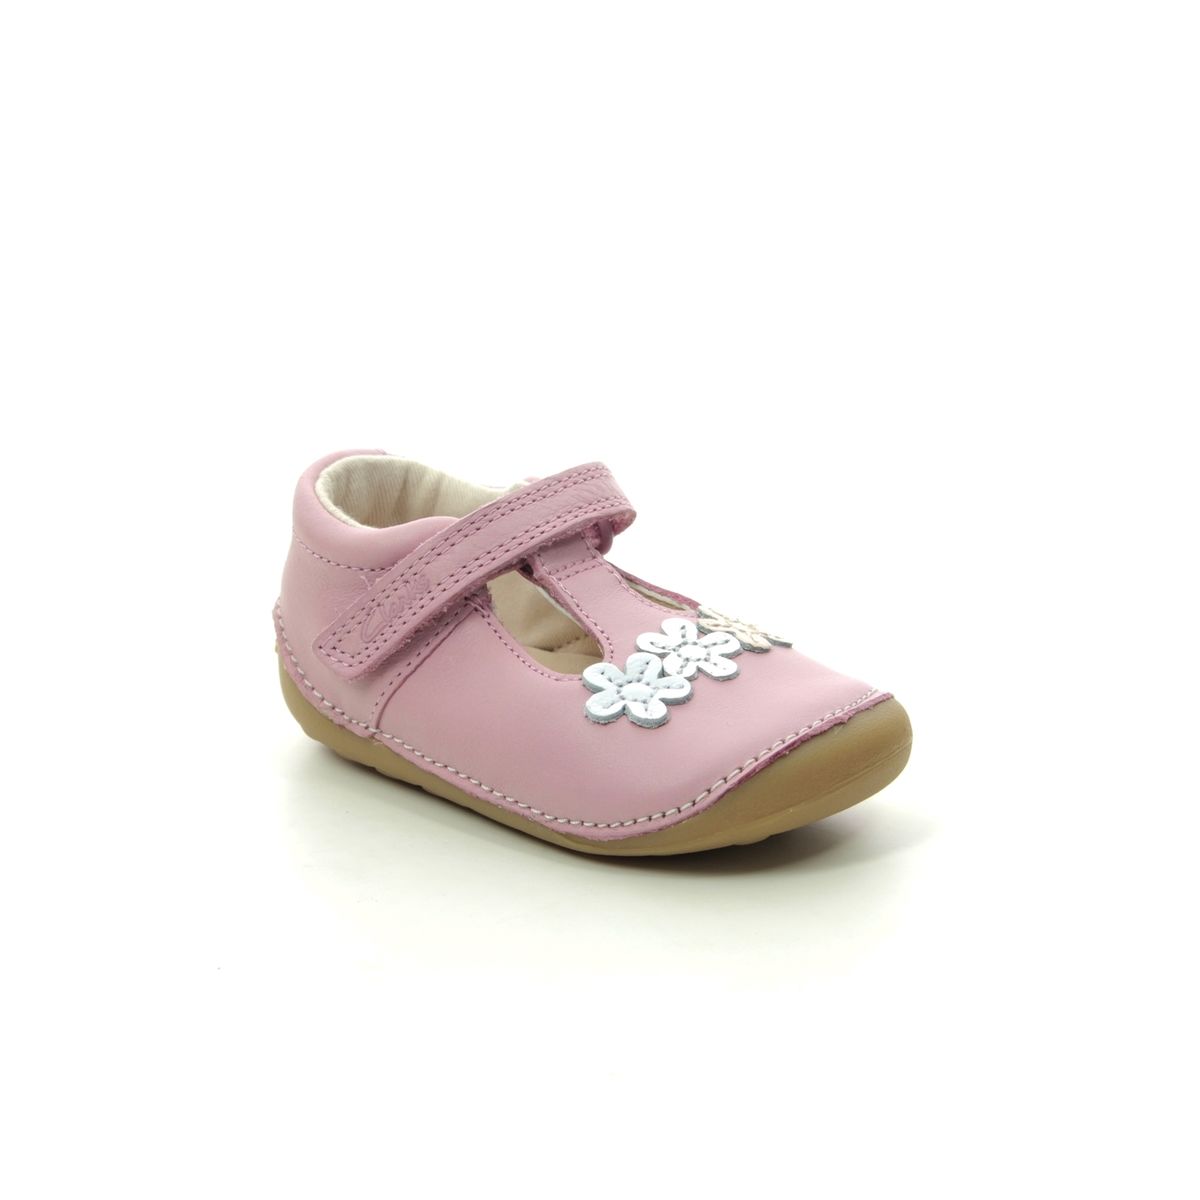 Clarks Tiny Sun T G Fit Pink Leather girls first baby shoes